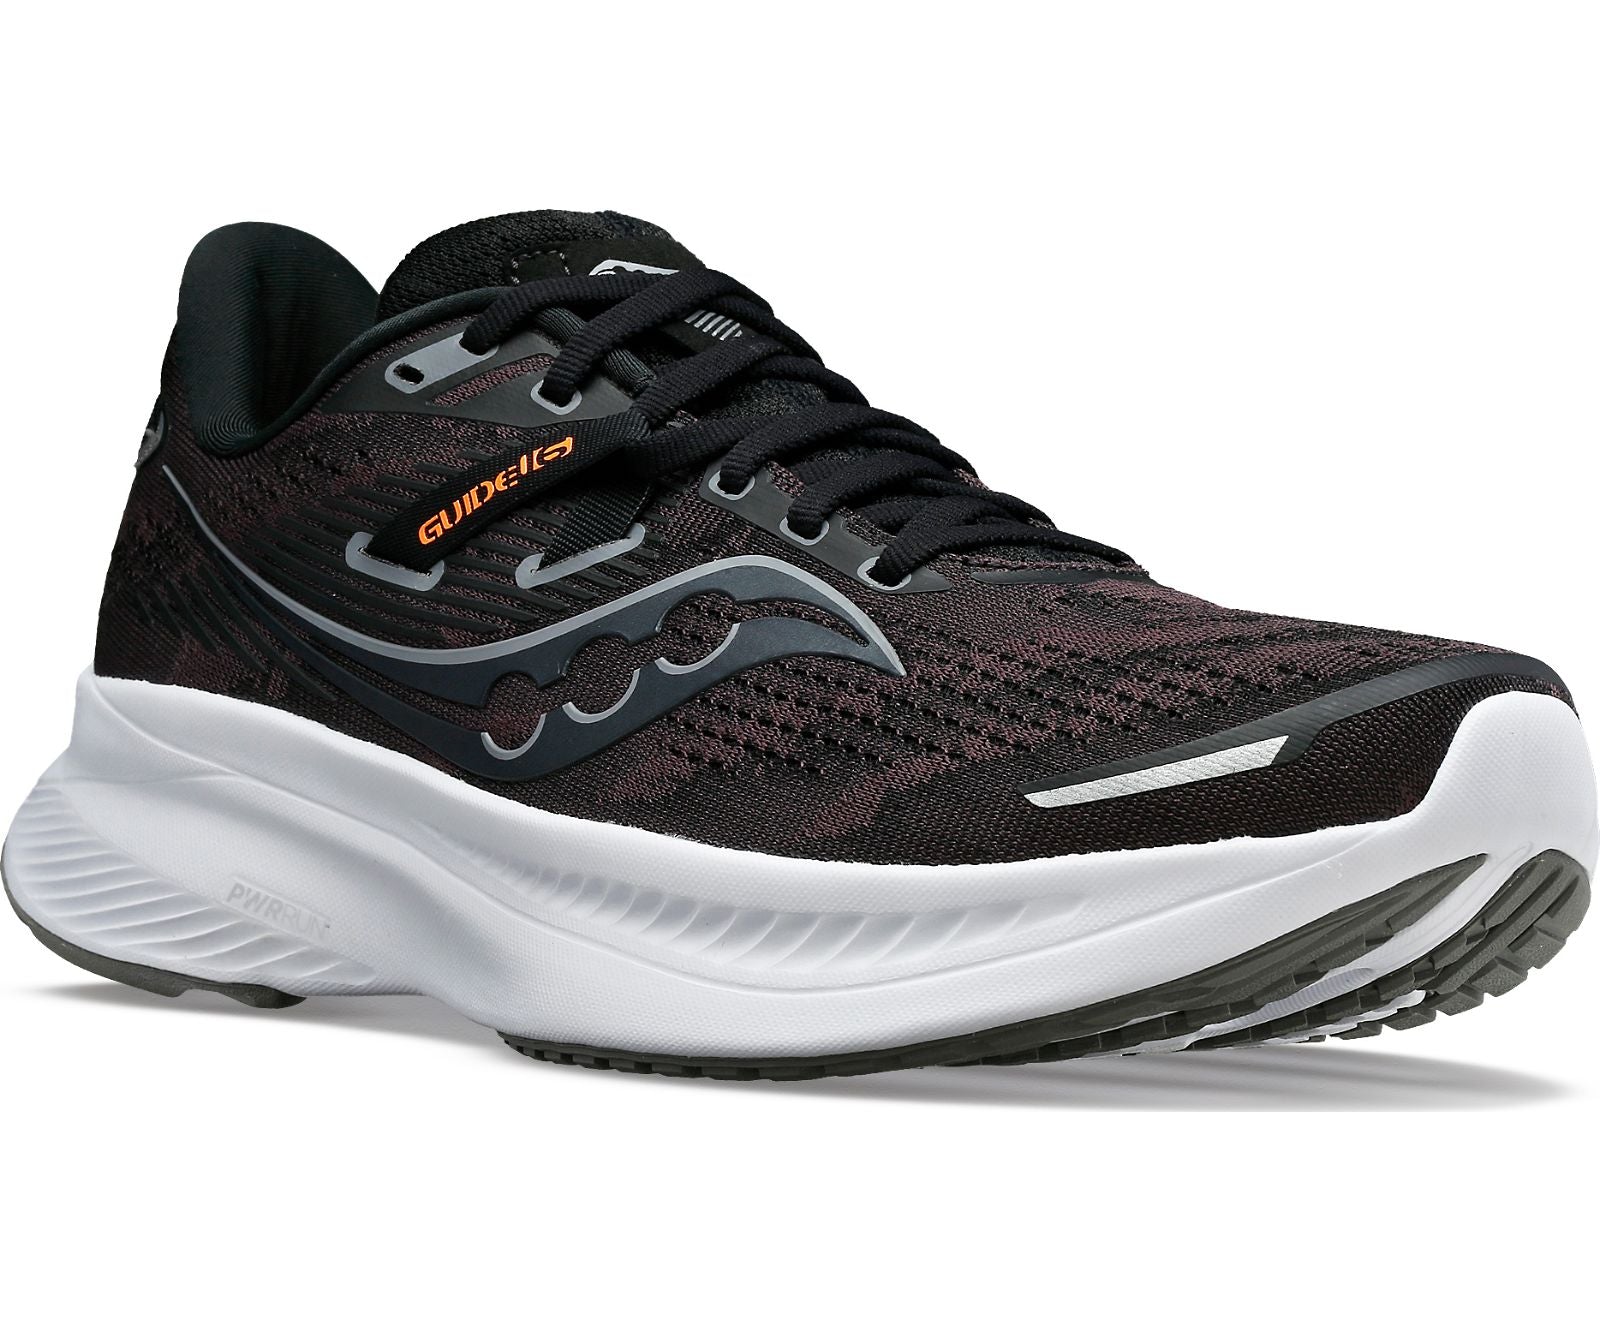 Front view of the Women's Saucony Guide 16 in the Black/White